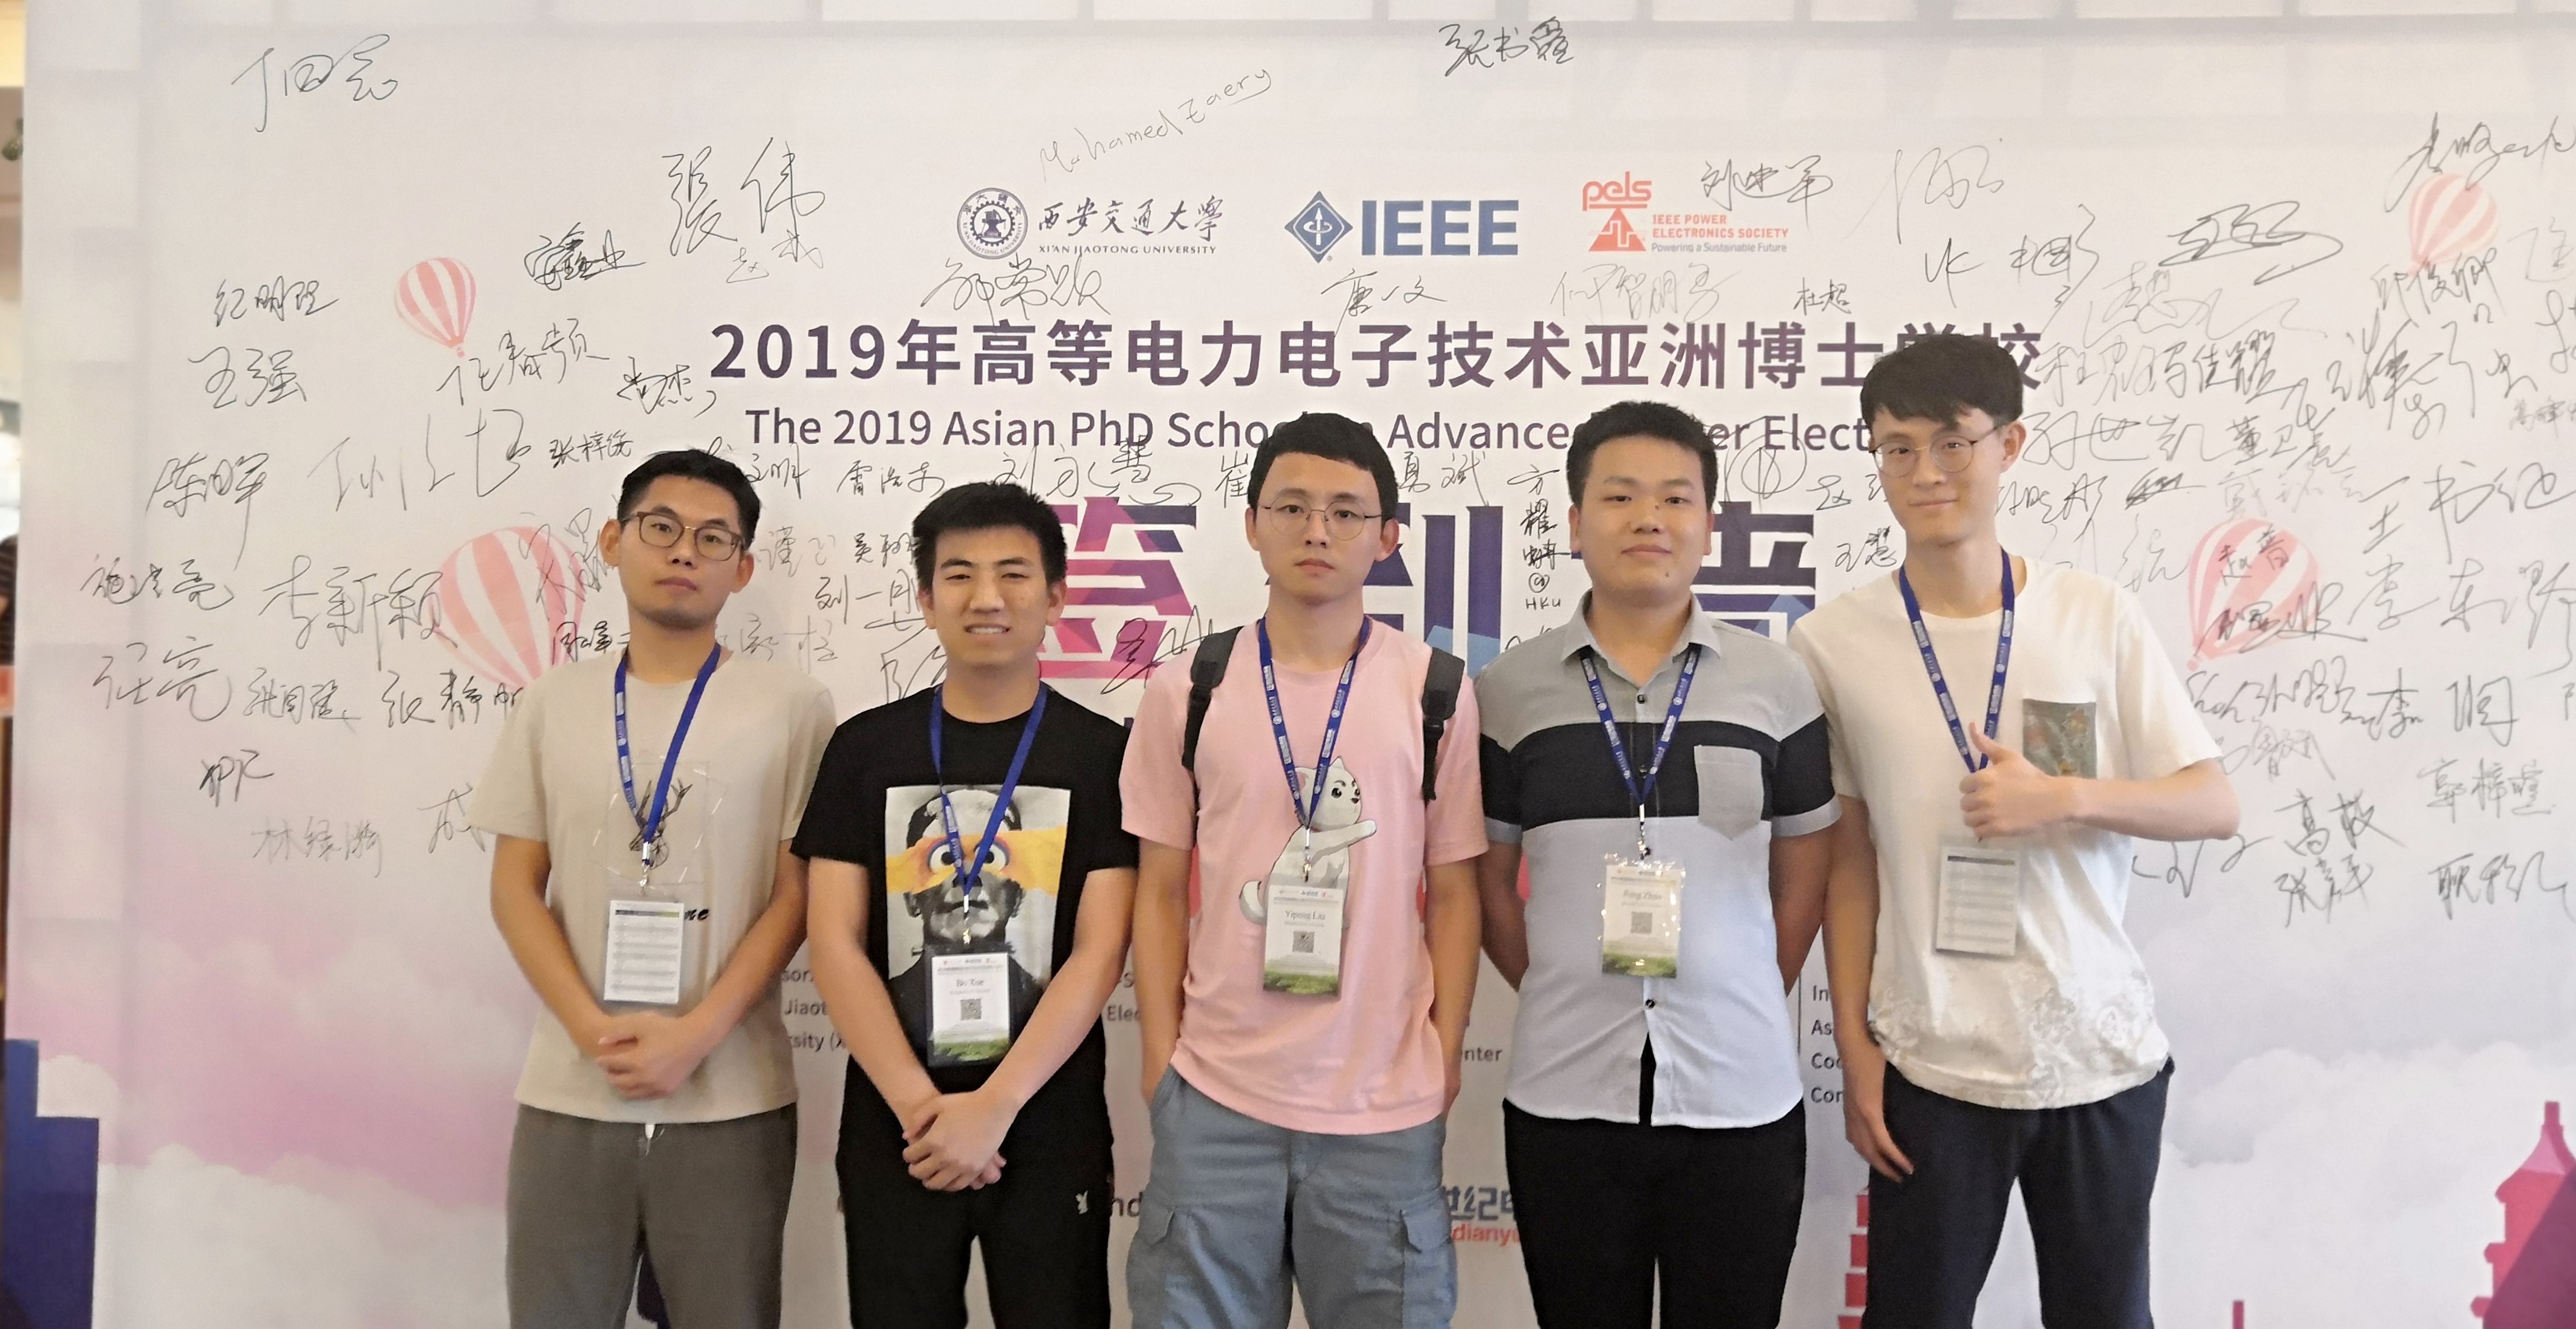 The PhD candidates of CAPES participated in 2019 Asian PhD School on Advanced Power Electronics